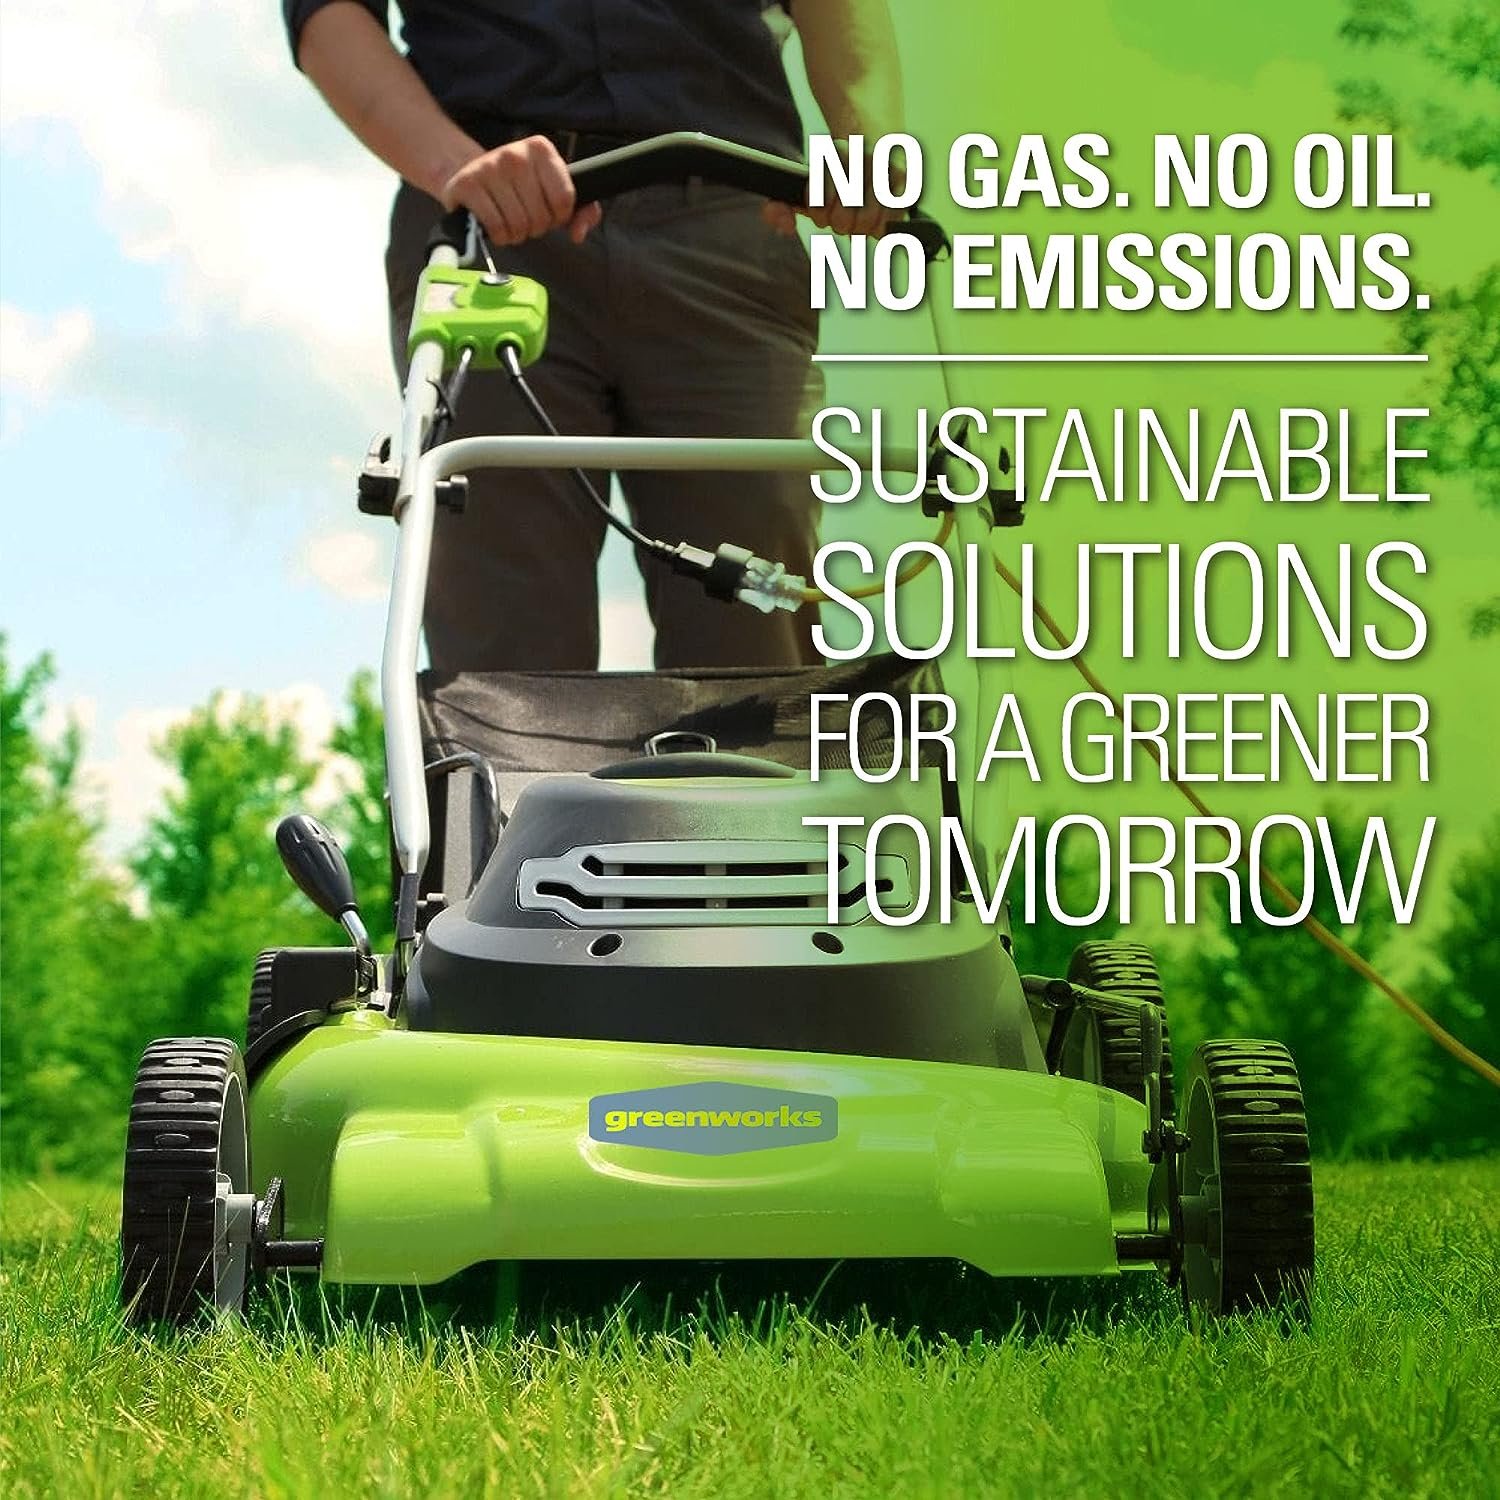 Greenworks 12 Amp Lawn Mower Review